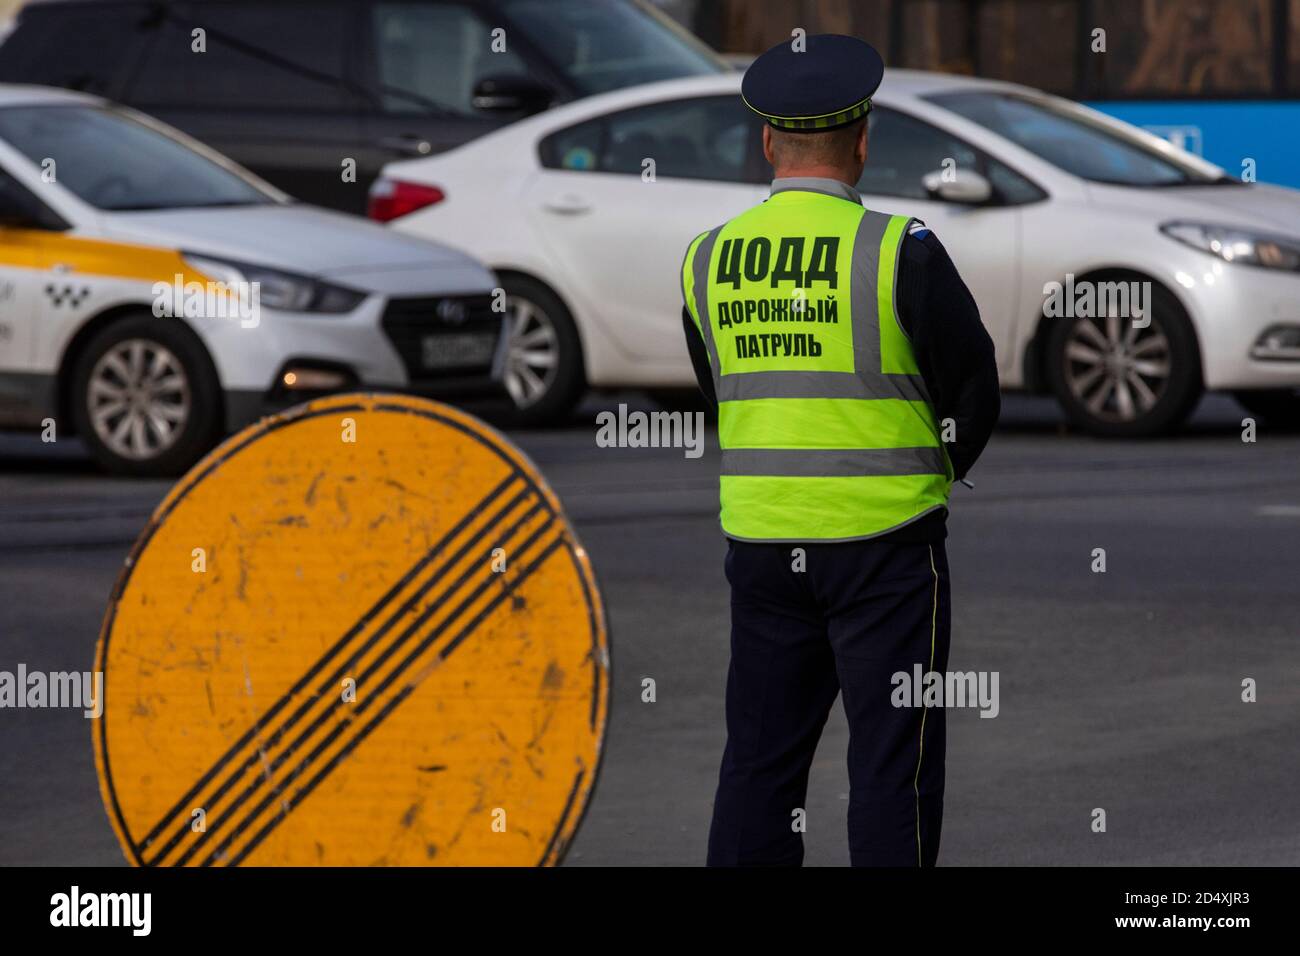 Moscow, Russia. 3rd of October, 2020 An employee of Moscow's Traffic Management Center regulates traffic at the intersection of Tverskaya street in the center of Moscow, Russia. The inscription on man's back reads 'Traffic management center, road patrol' Stock Photo